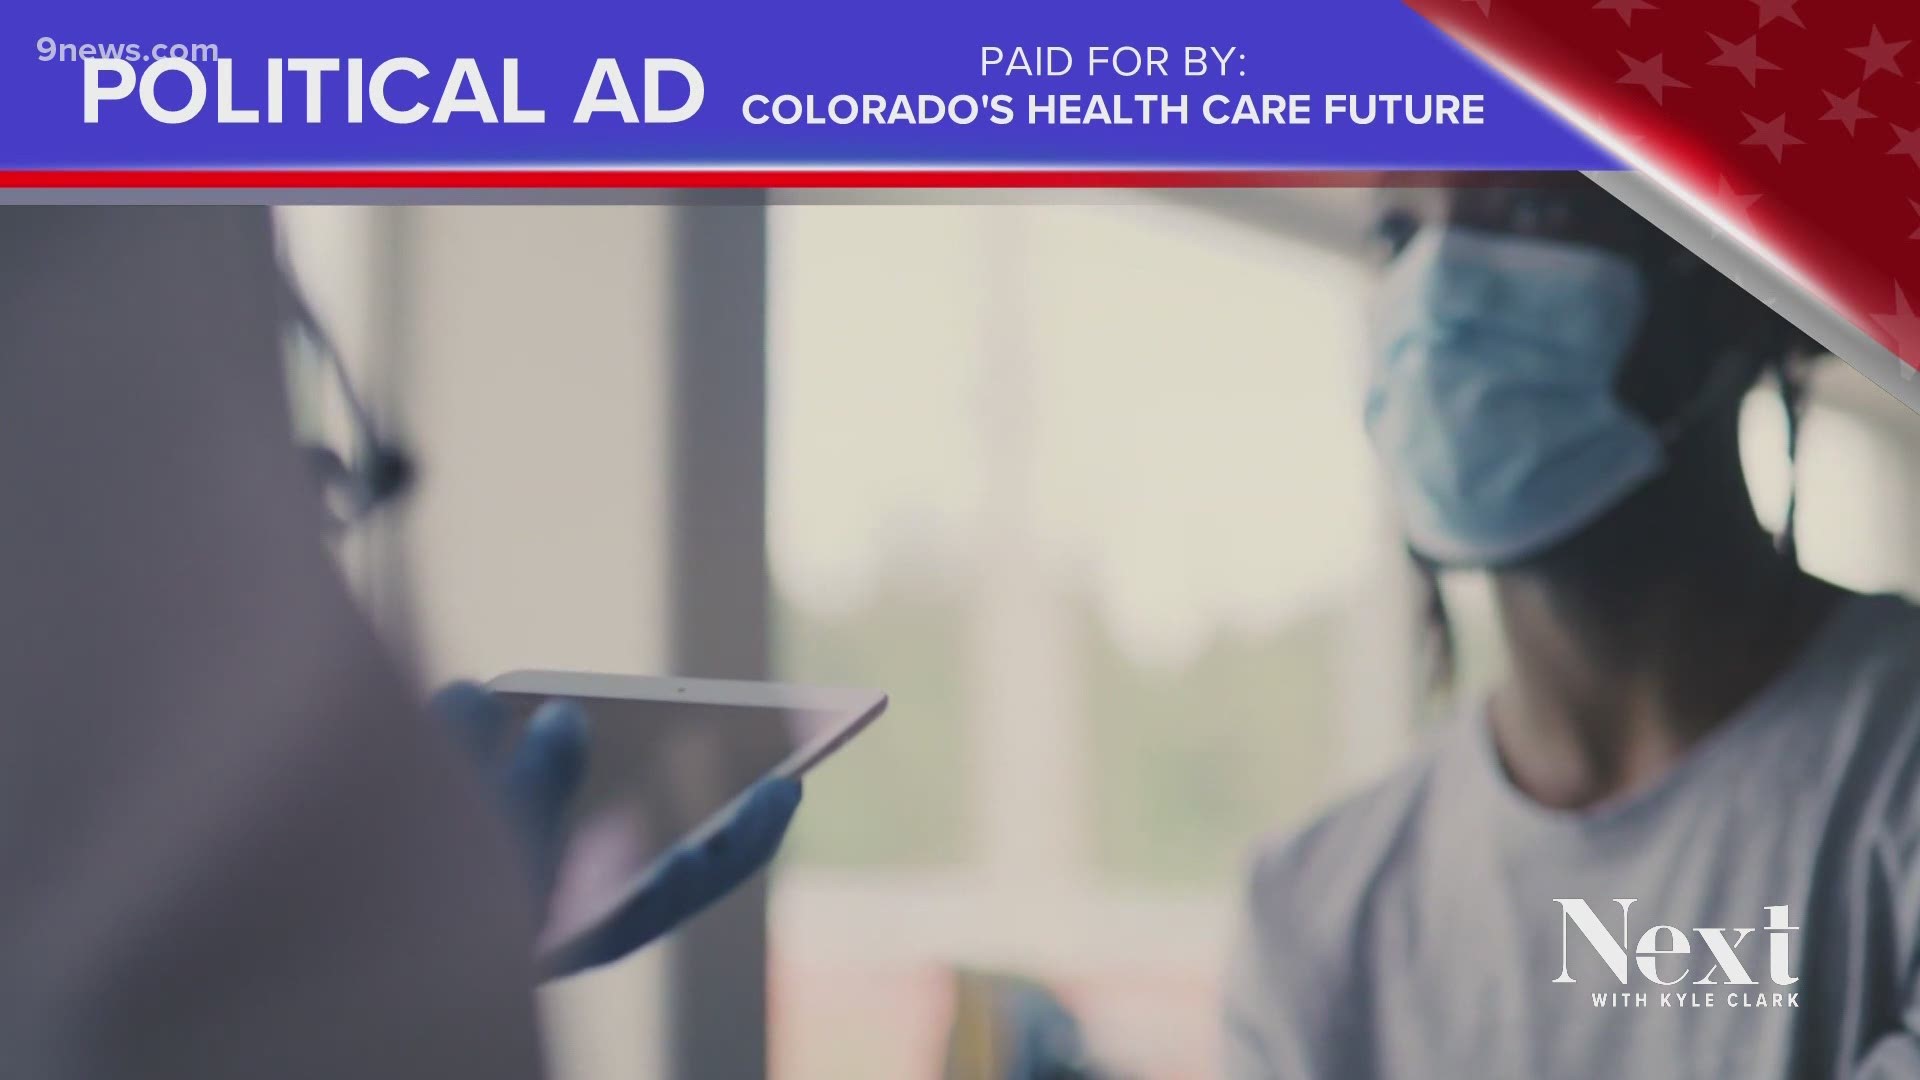 A new ad airing in Colorado makes claims about the state government health care option. We put it to a Truth Test.